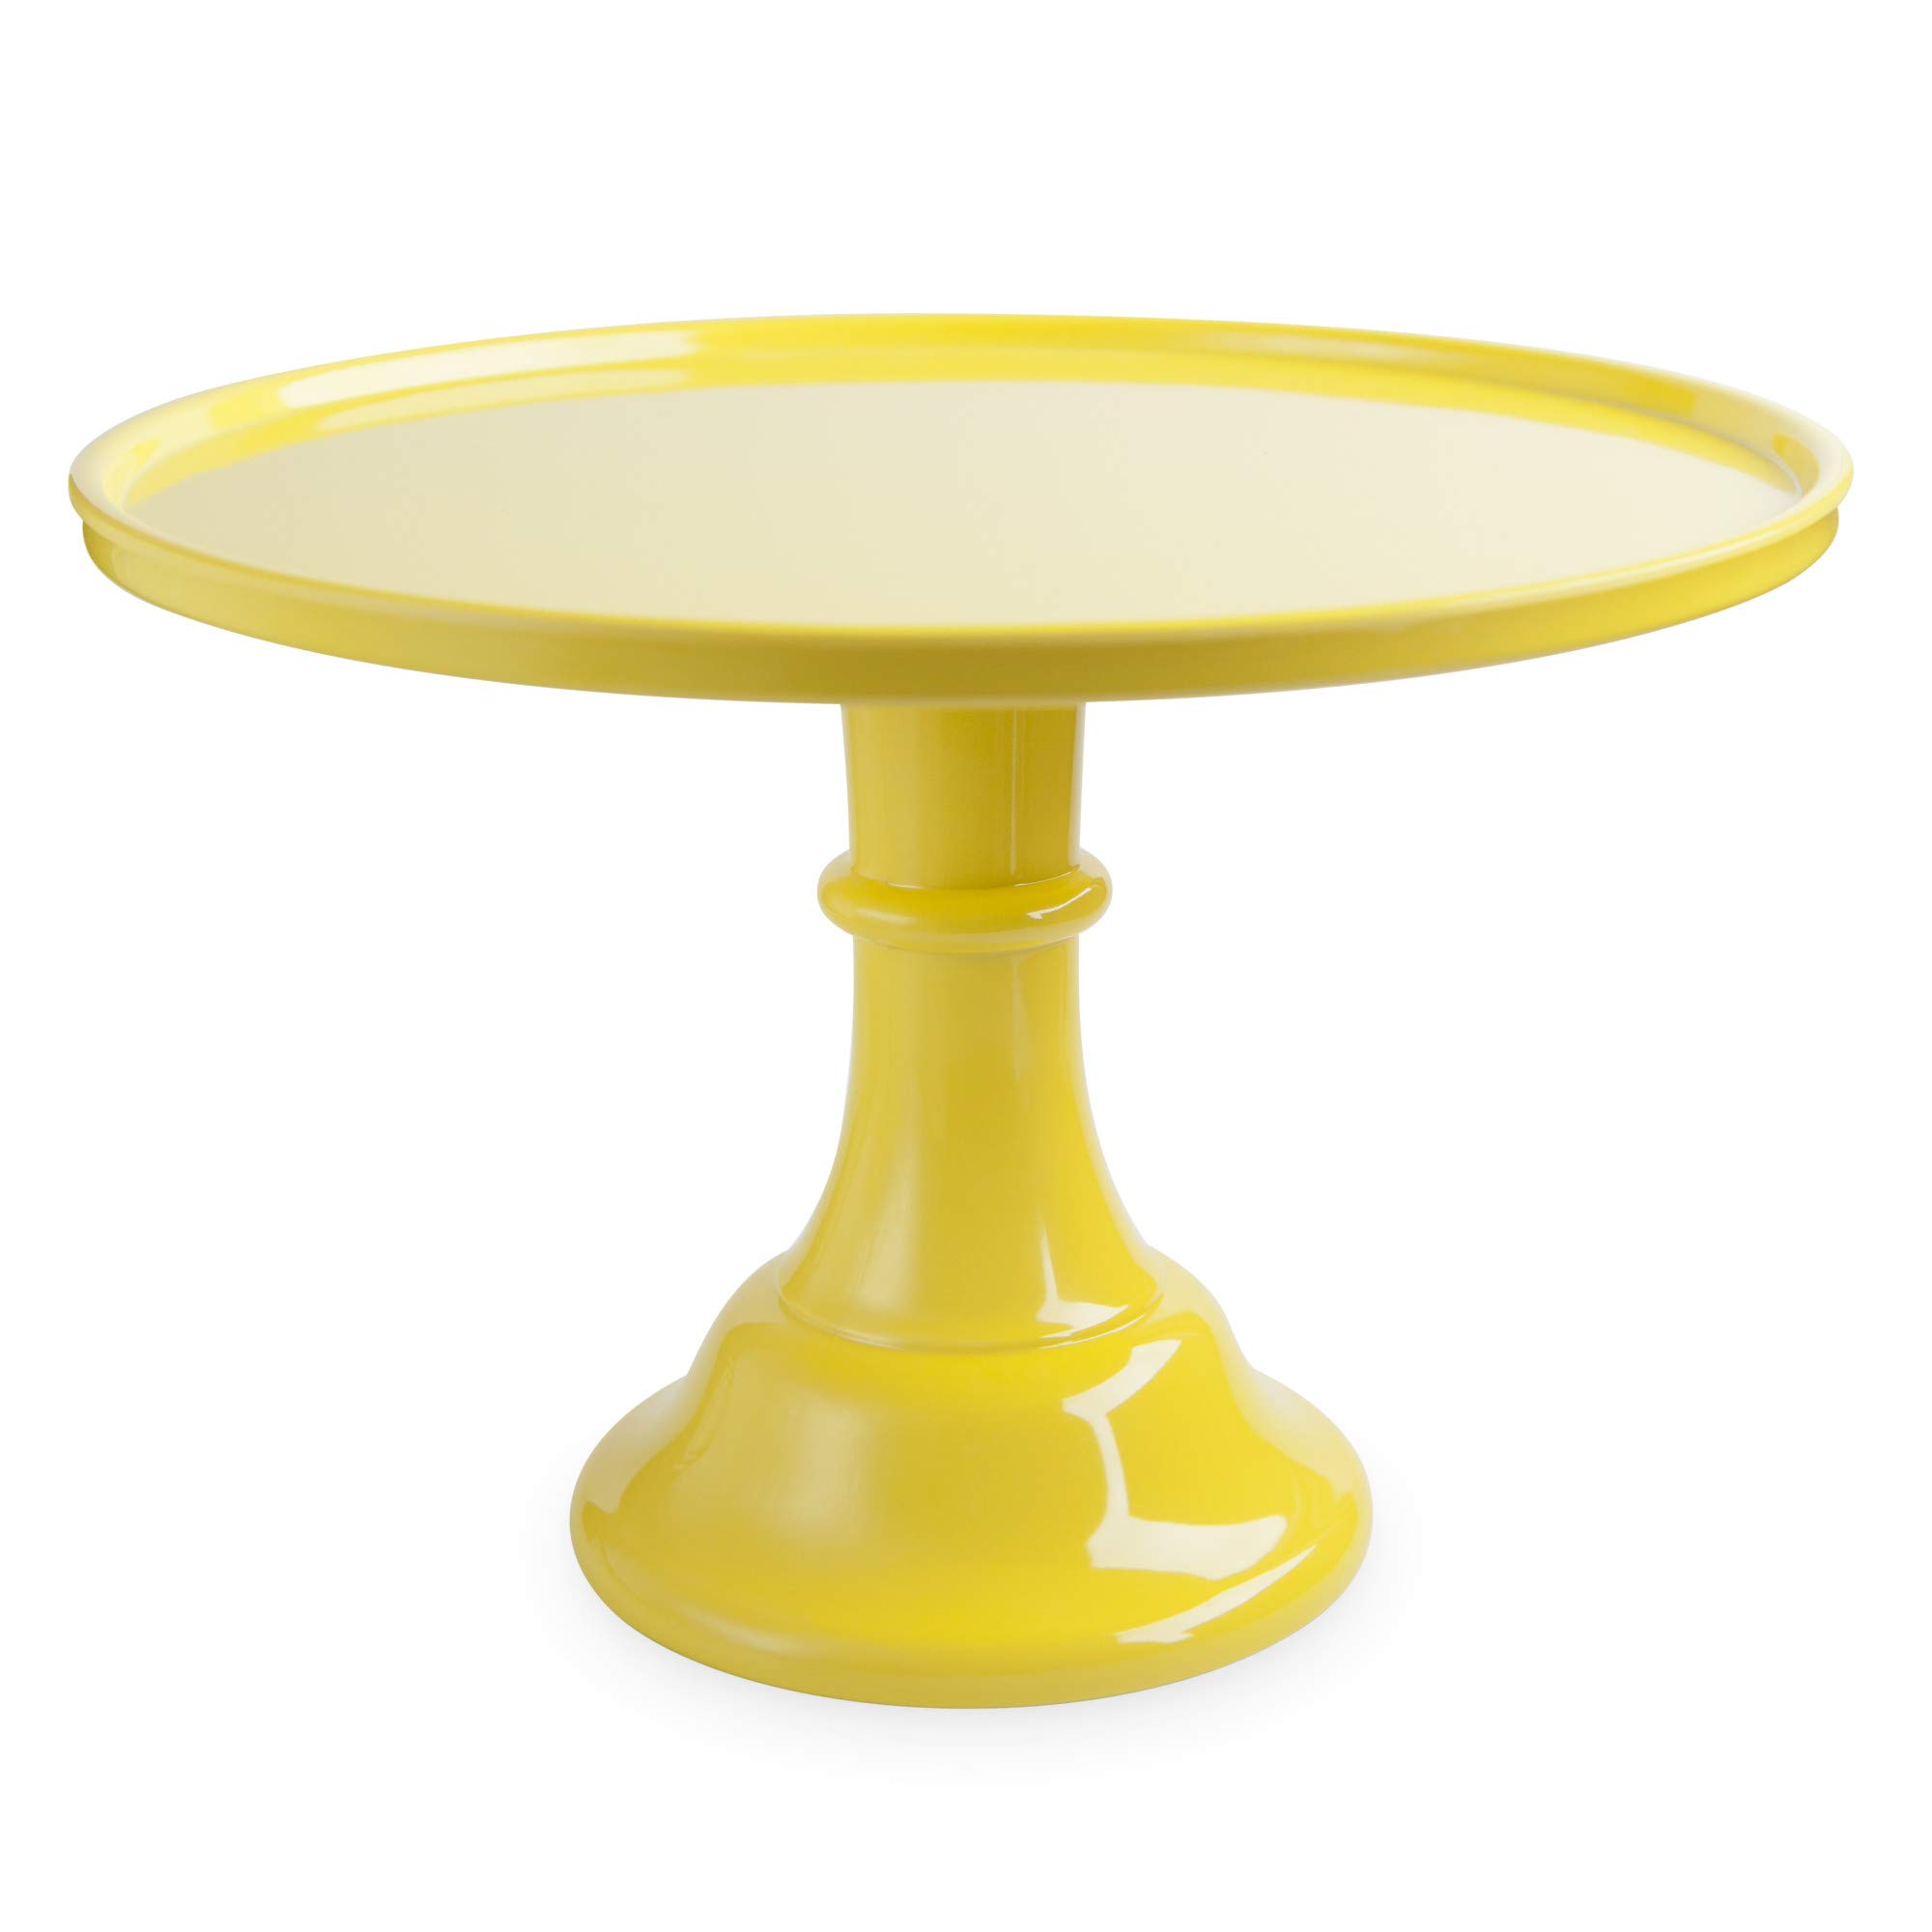 Twine Yellow Melamine Cake Stand, Cupcake Stand, Home Decor, Food Service, Dessert Accessory, Yellow, Set of 1